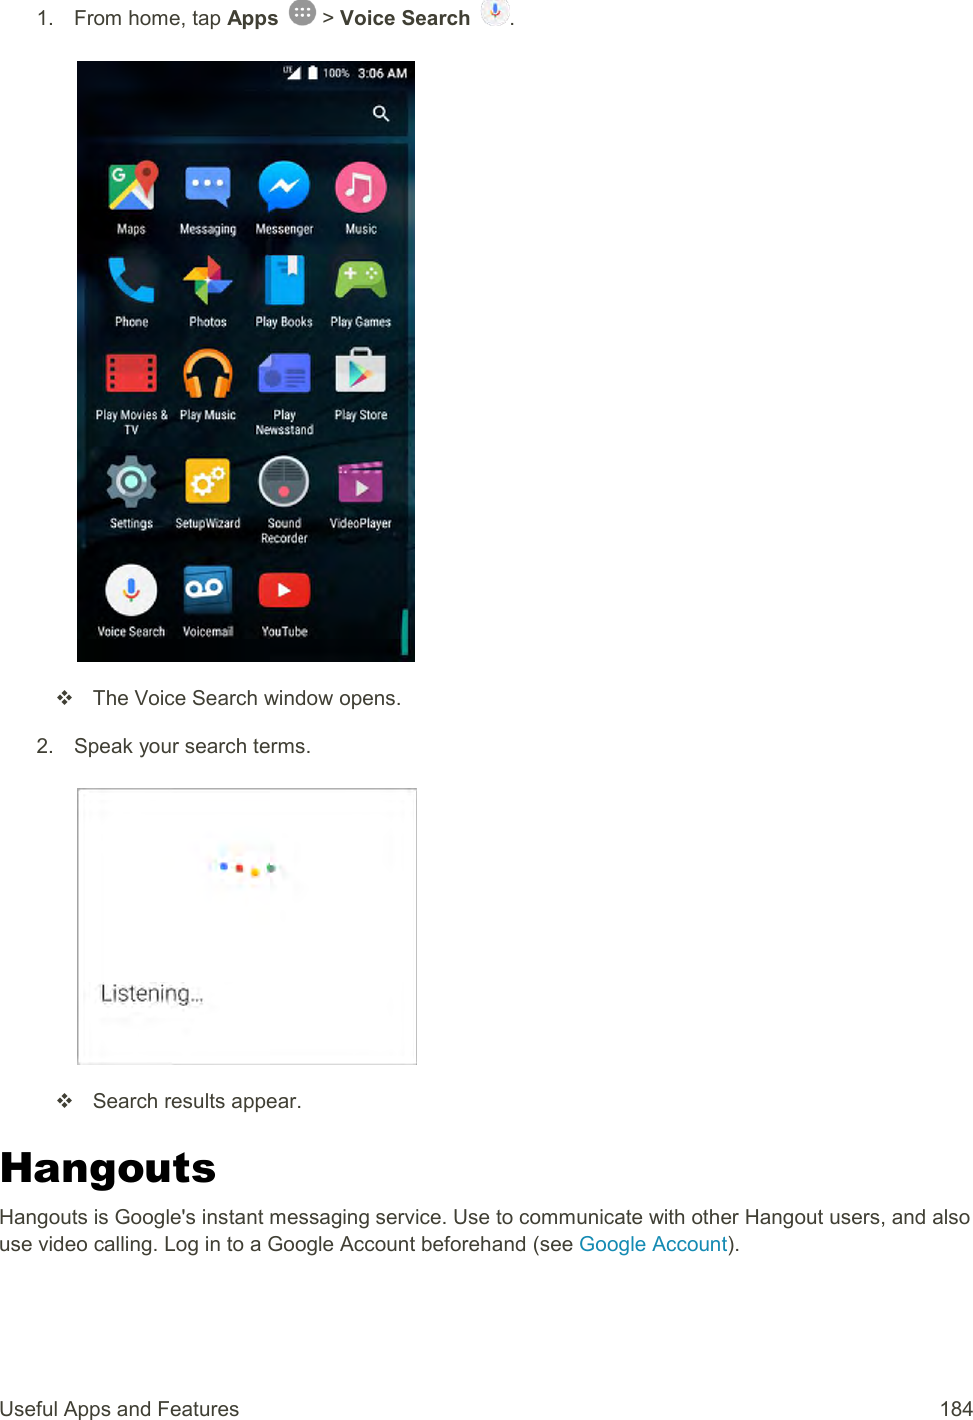 Useful Apps and Features  184 1.  From home, tap Apps   &gt; Voice Search  .     The Voice Search window opens. 2.  Speak your search terms.     Search results appear. Hangouts Hangouts is Google&apos;s instant messaging service. Use to communicate with other Hangout users, and also use video calling. Log in to a Google Account beforehand (see Google Account). 